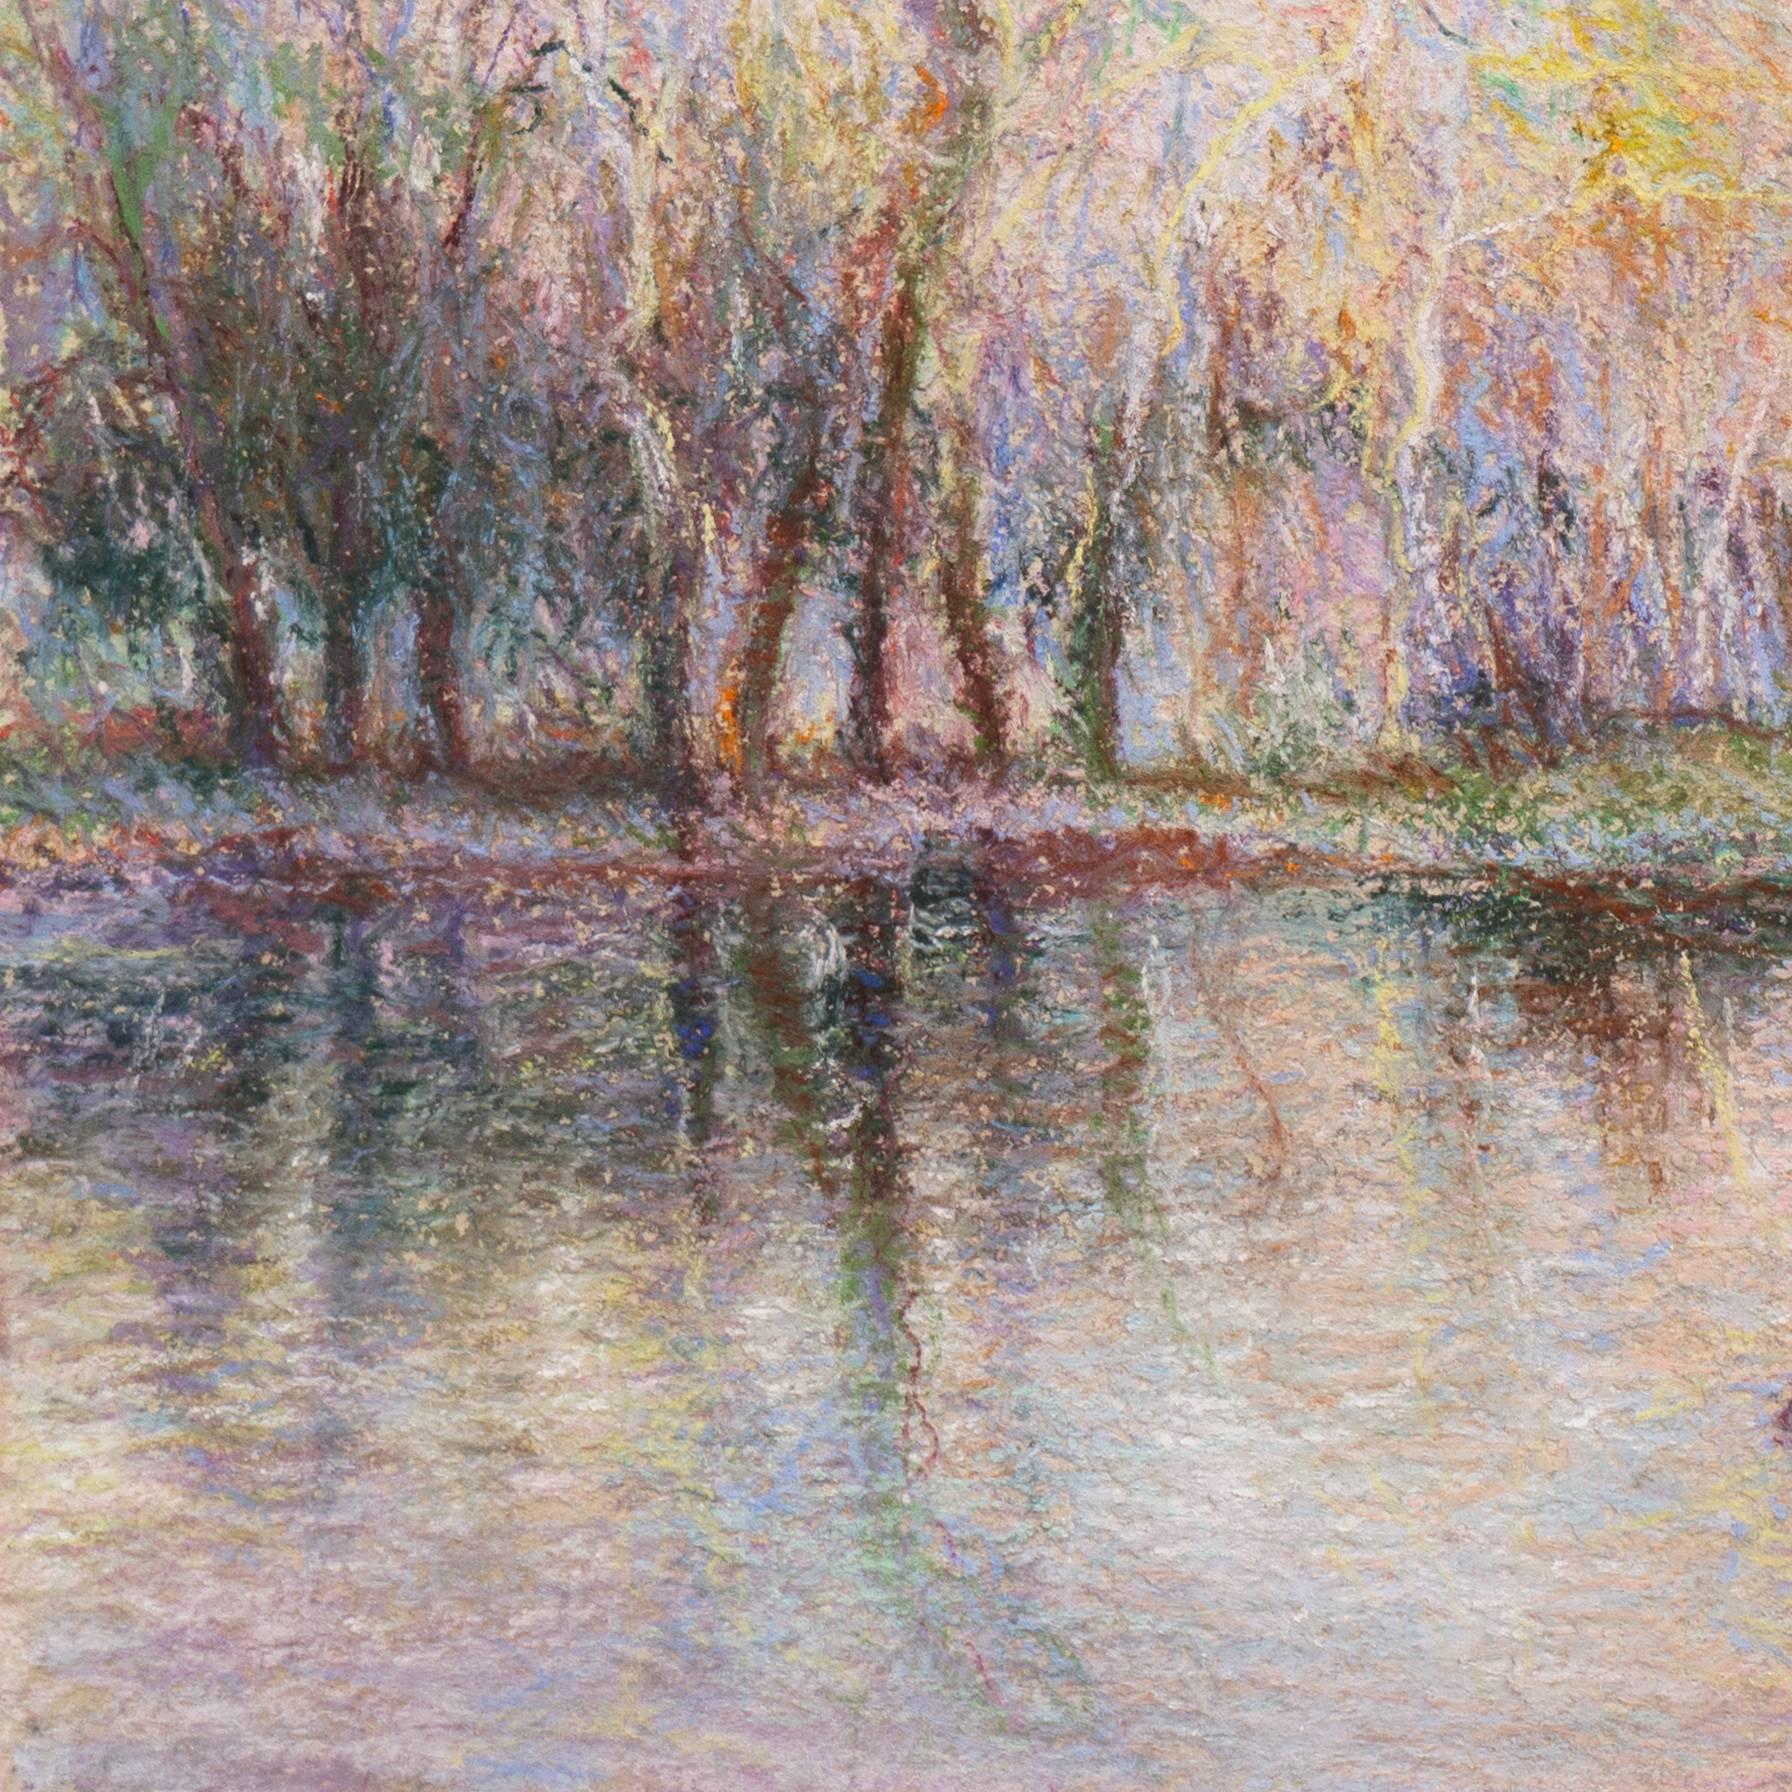 An Impressionist study showing a view of a leisure rowboat moored at the shore of a lake. 

Signed lower right, 'Orval' and dated 1992.

Displayed in an ivory mat.
Matted Dimensions: 22.5''H x 27.75''W x .25''D